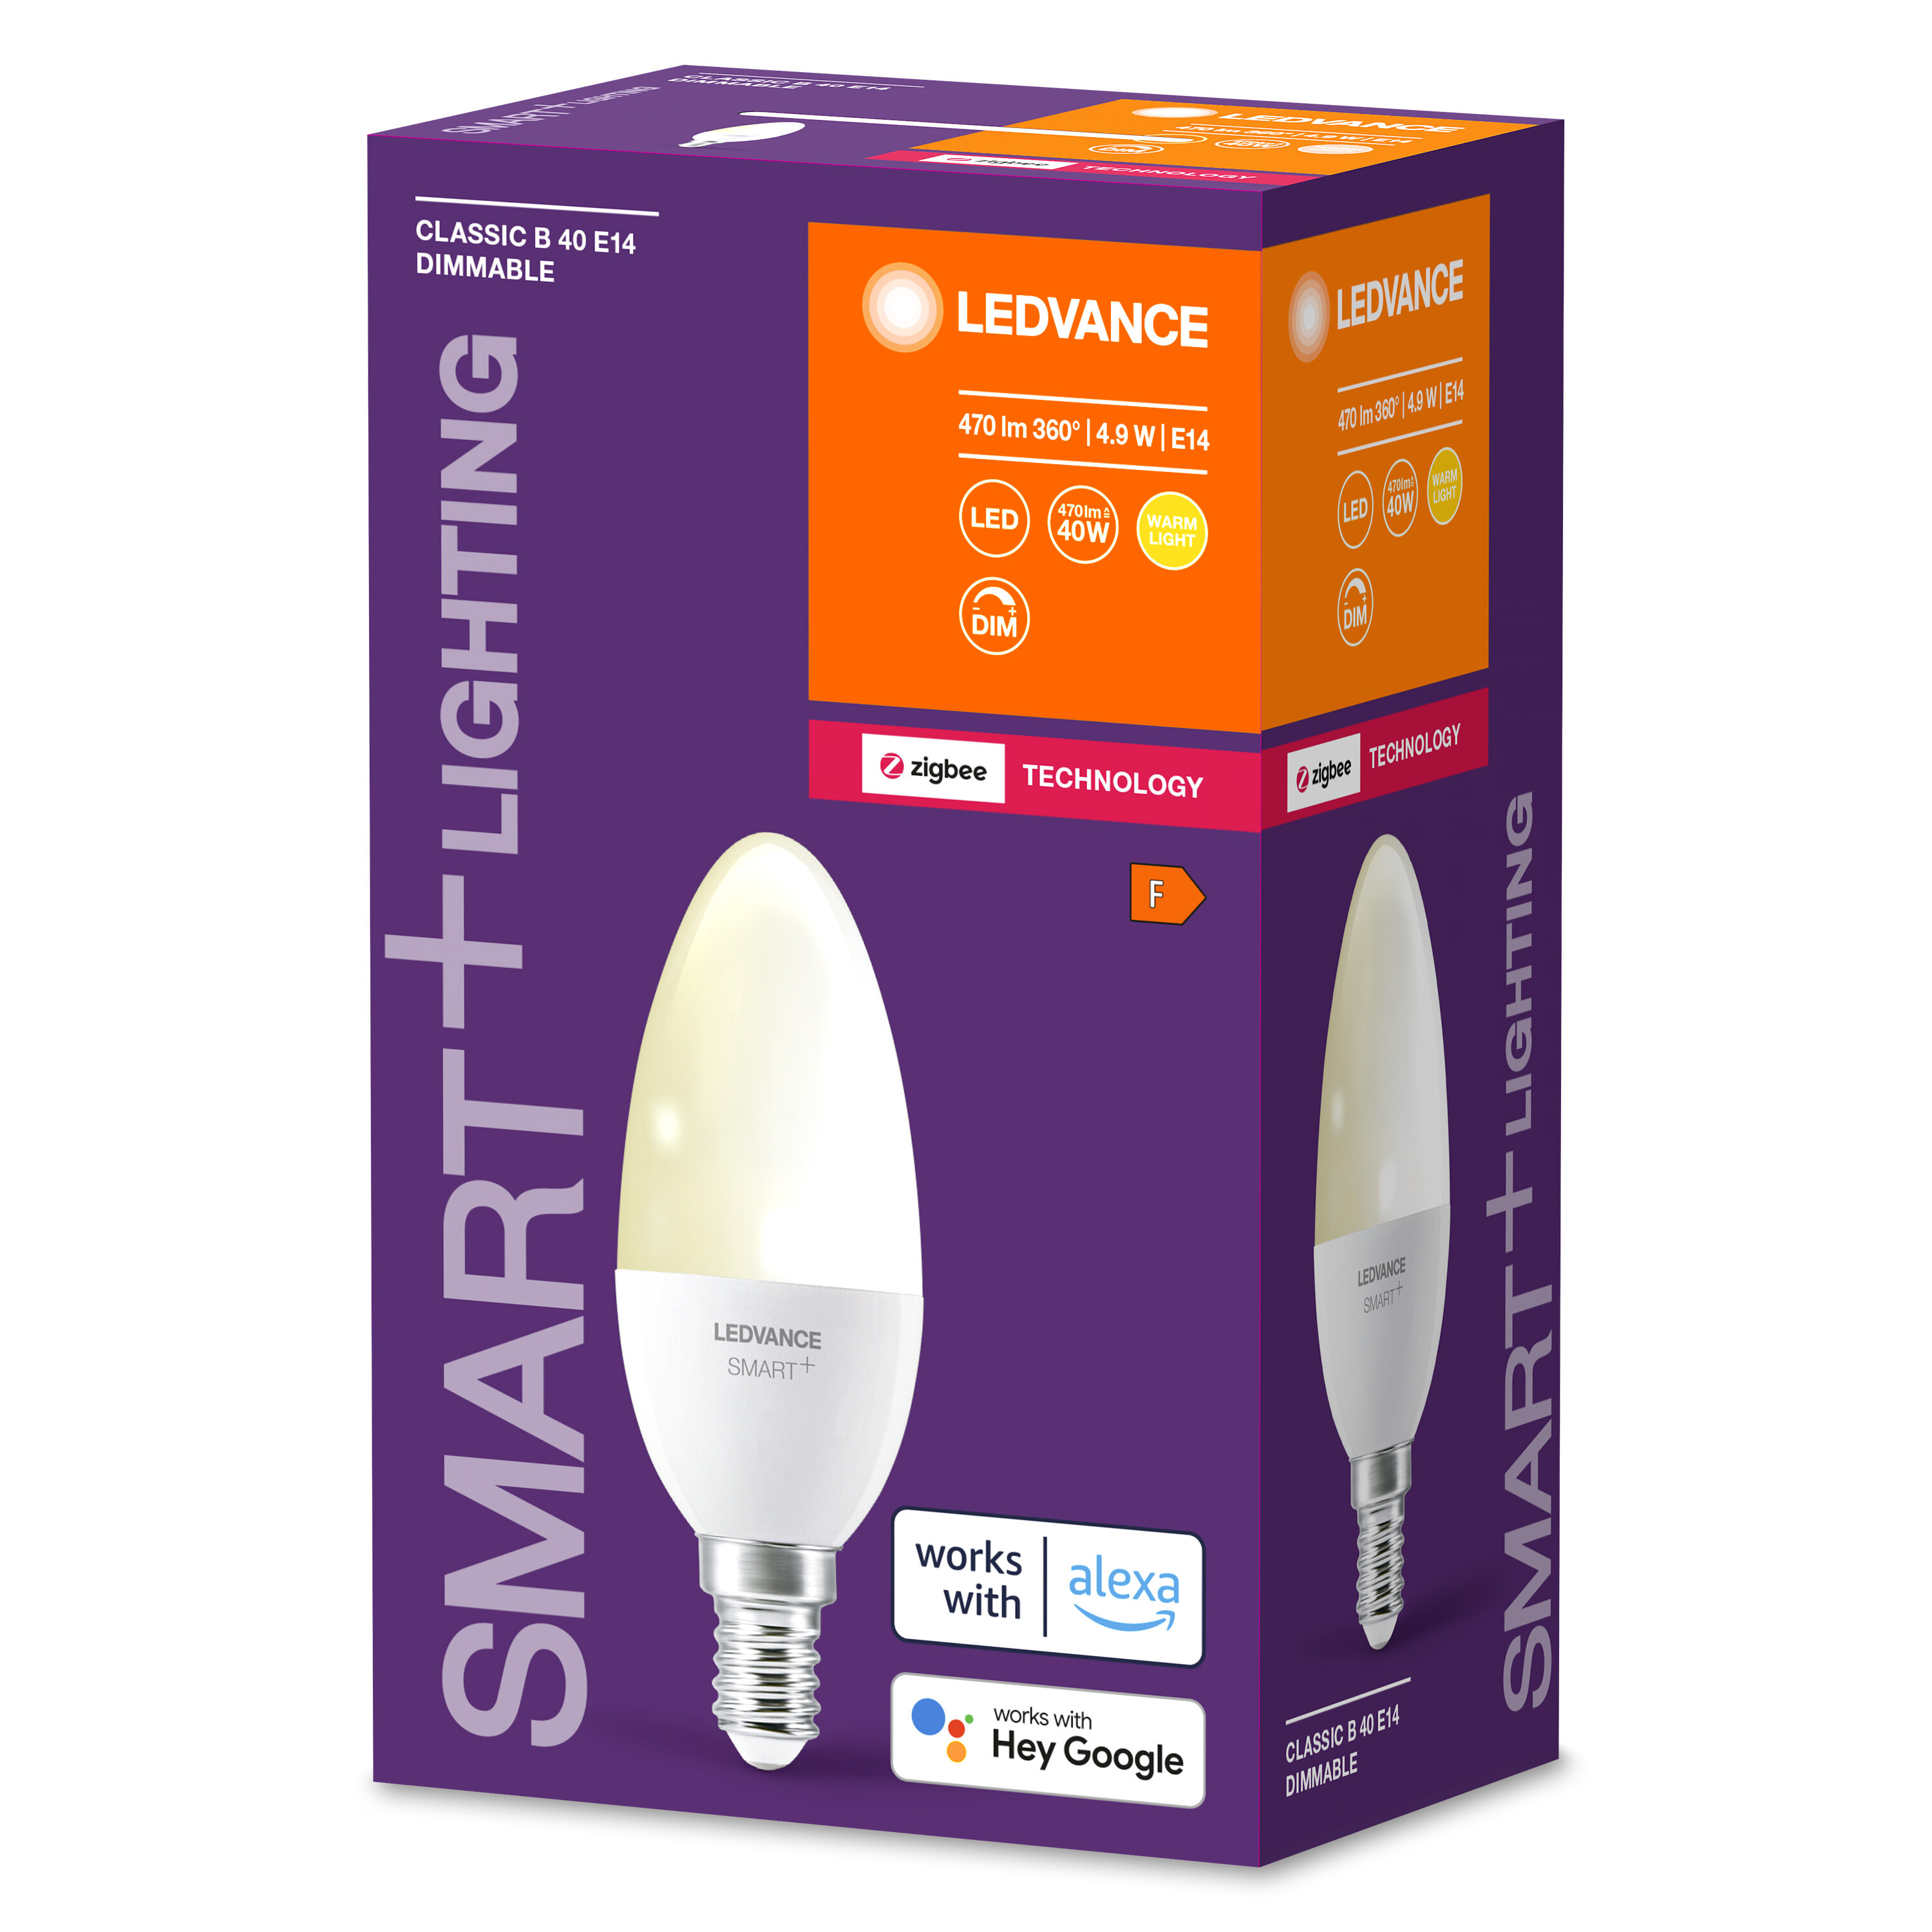 SMART+ LEDVANCE LED Warmweiß Lampe Candle Dimmable